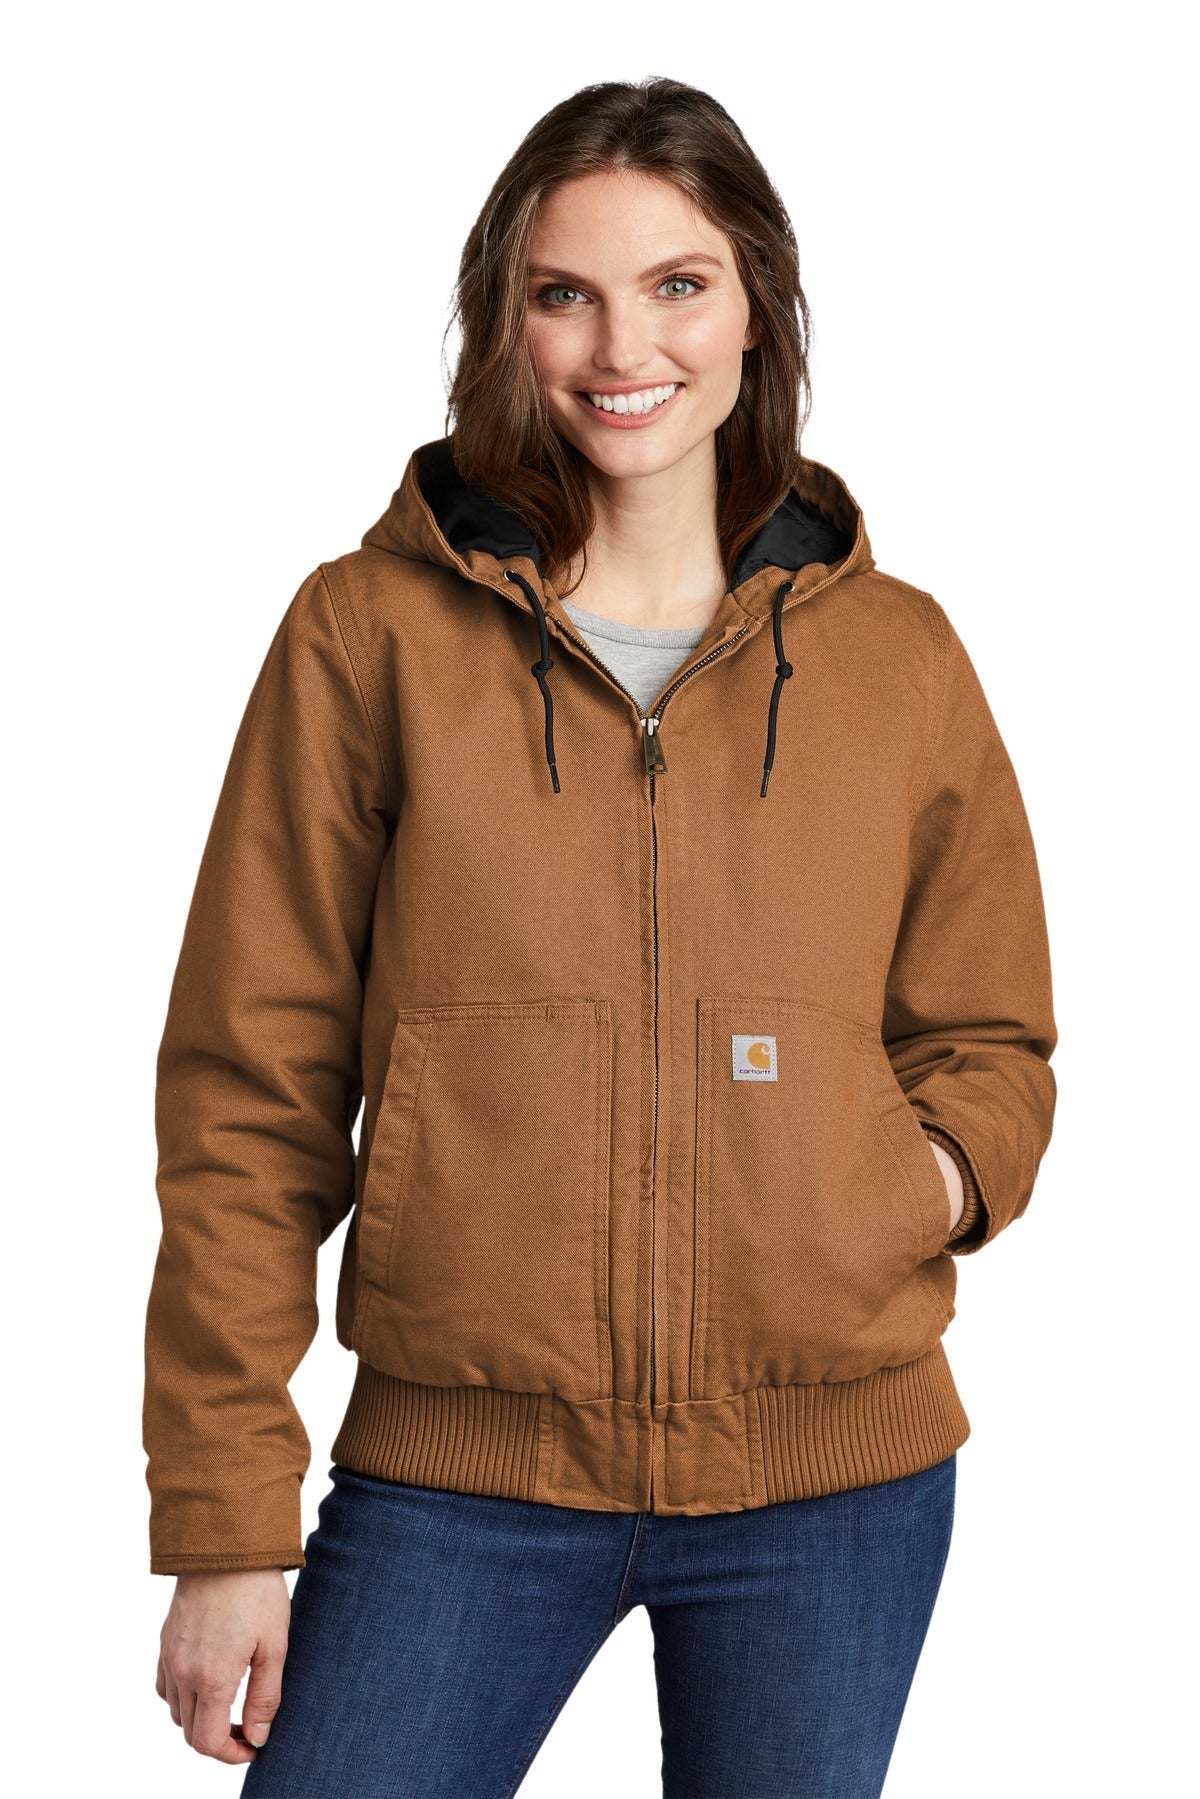 Carhartt® Women's Washed Duck Active Jac. CT104053 - DFW Impression